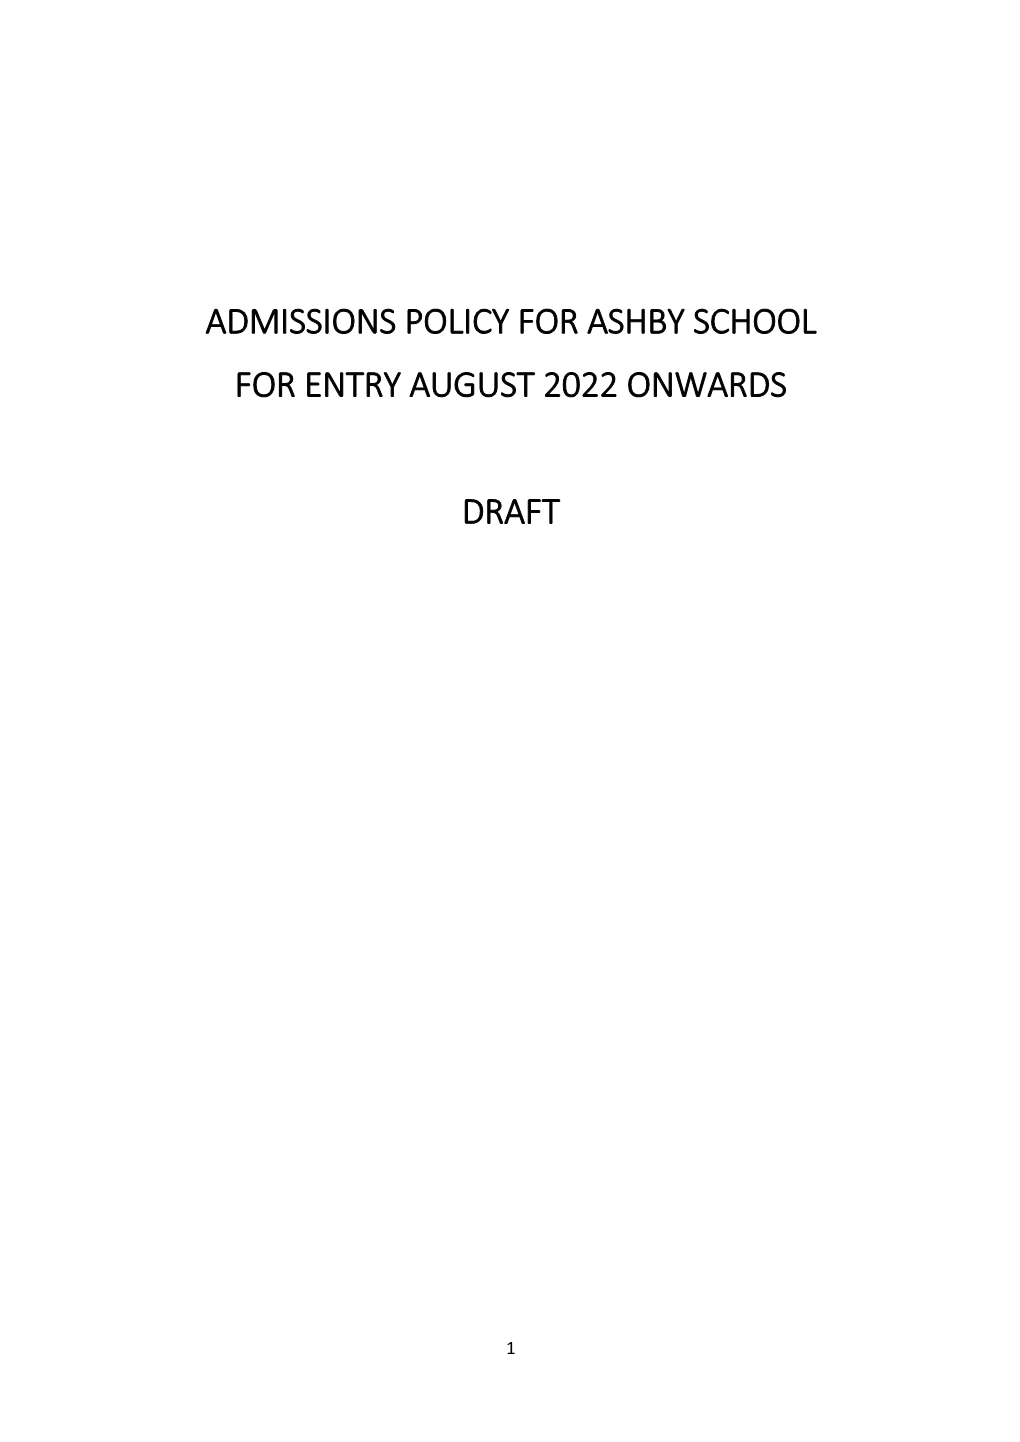 Admissions Policy Draft